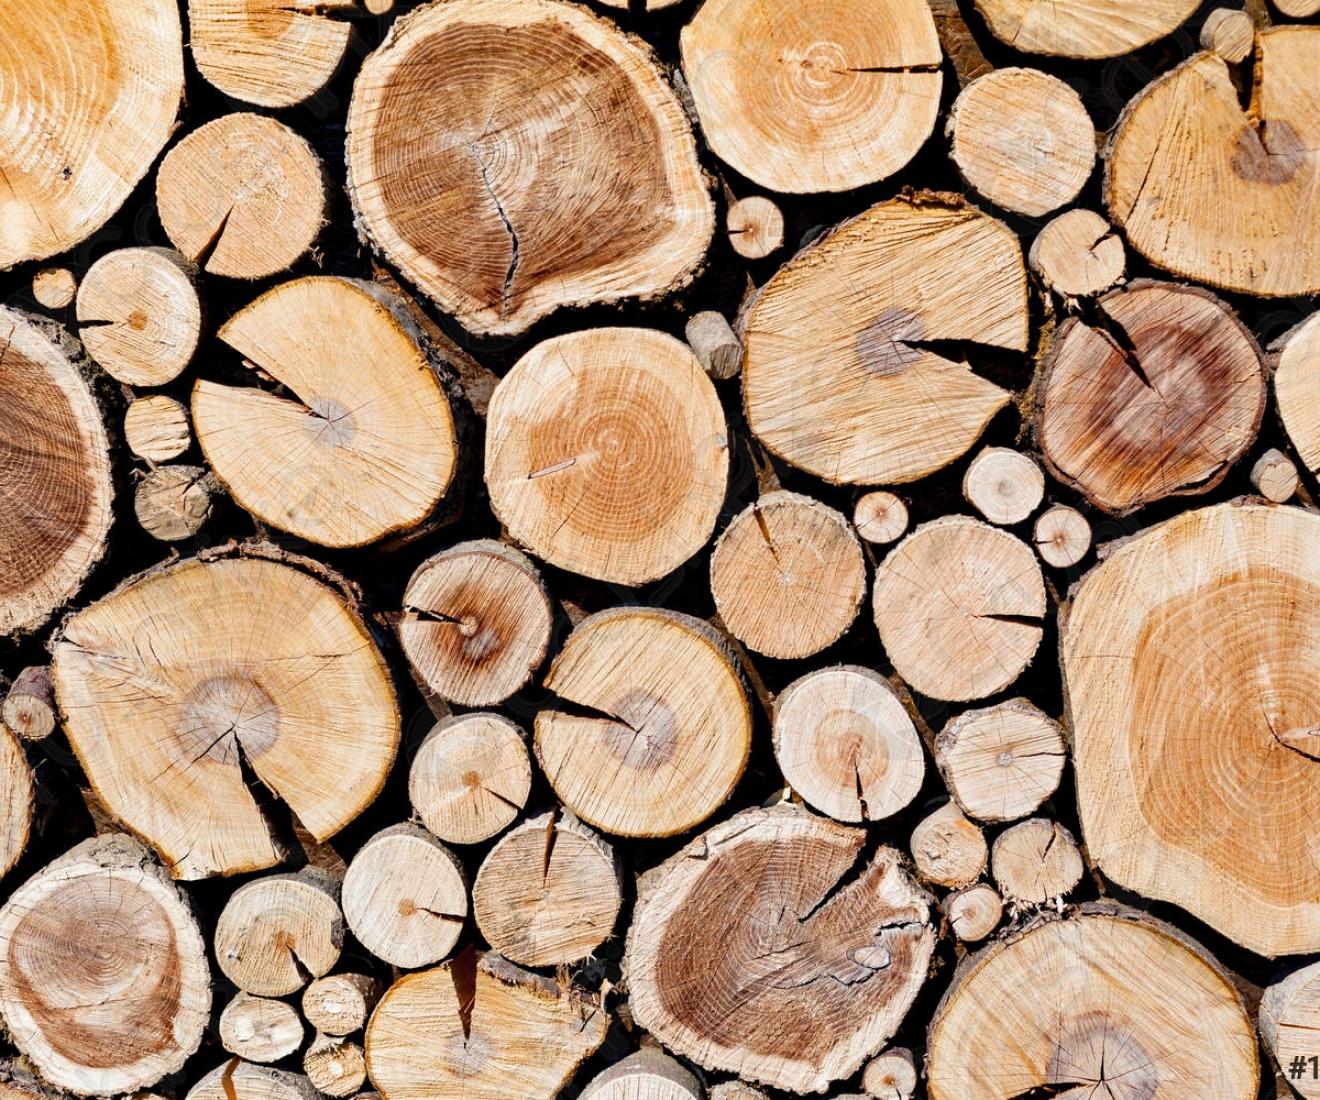 wall-stacked-wood-logs-background-1009541.jpg